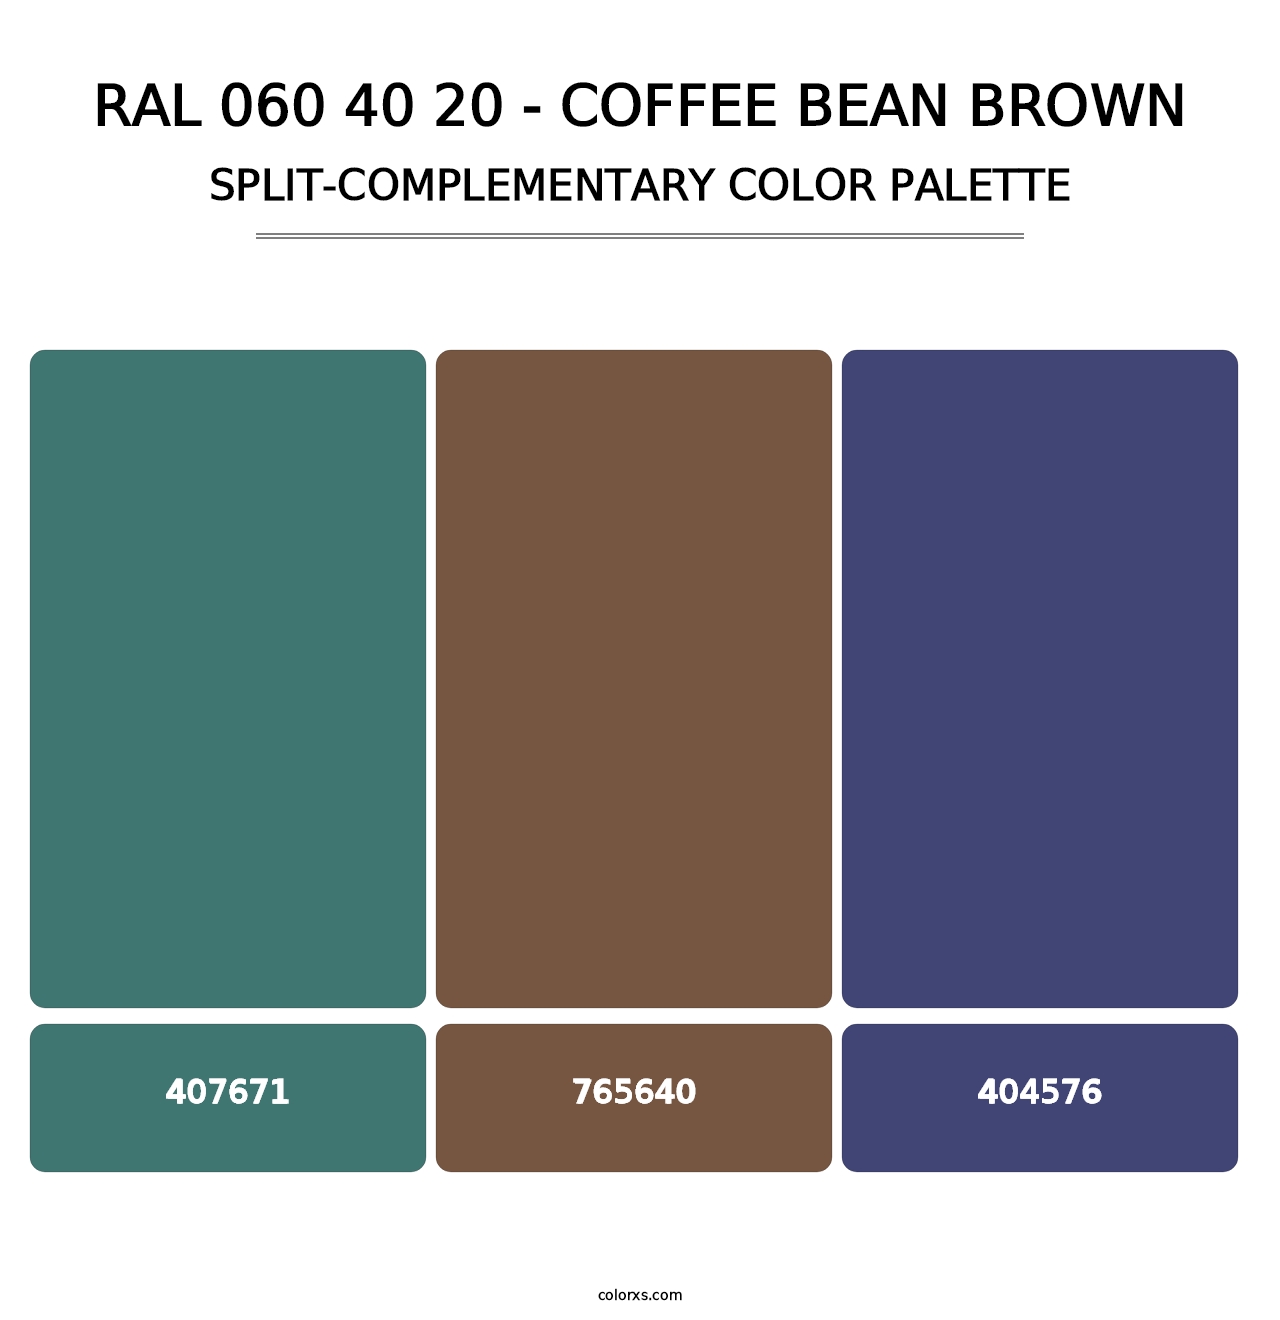 RAL 060 40 20 - Coffee Bean Brown - Split-Complementary Color Palette